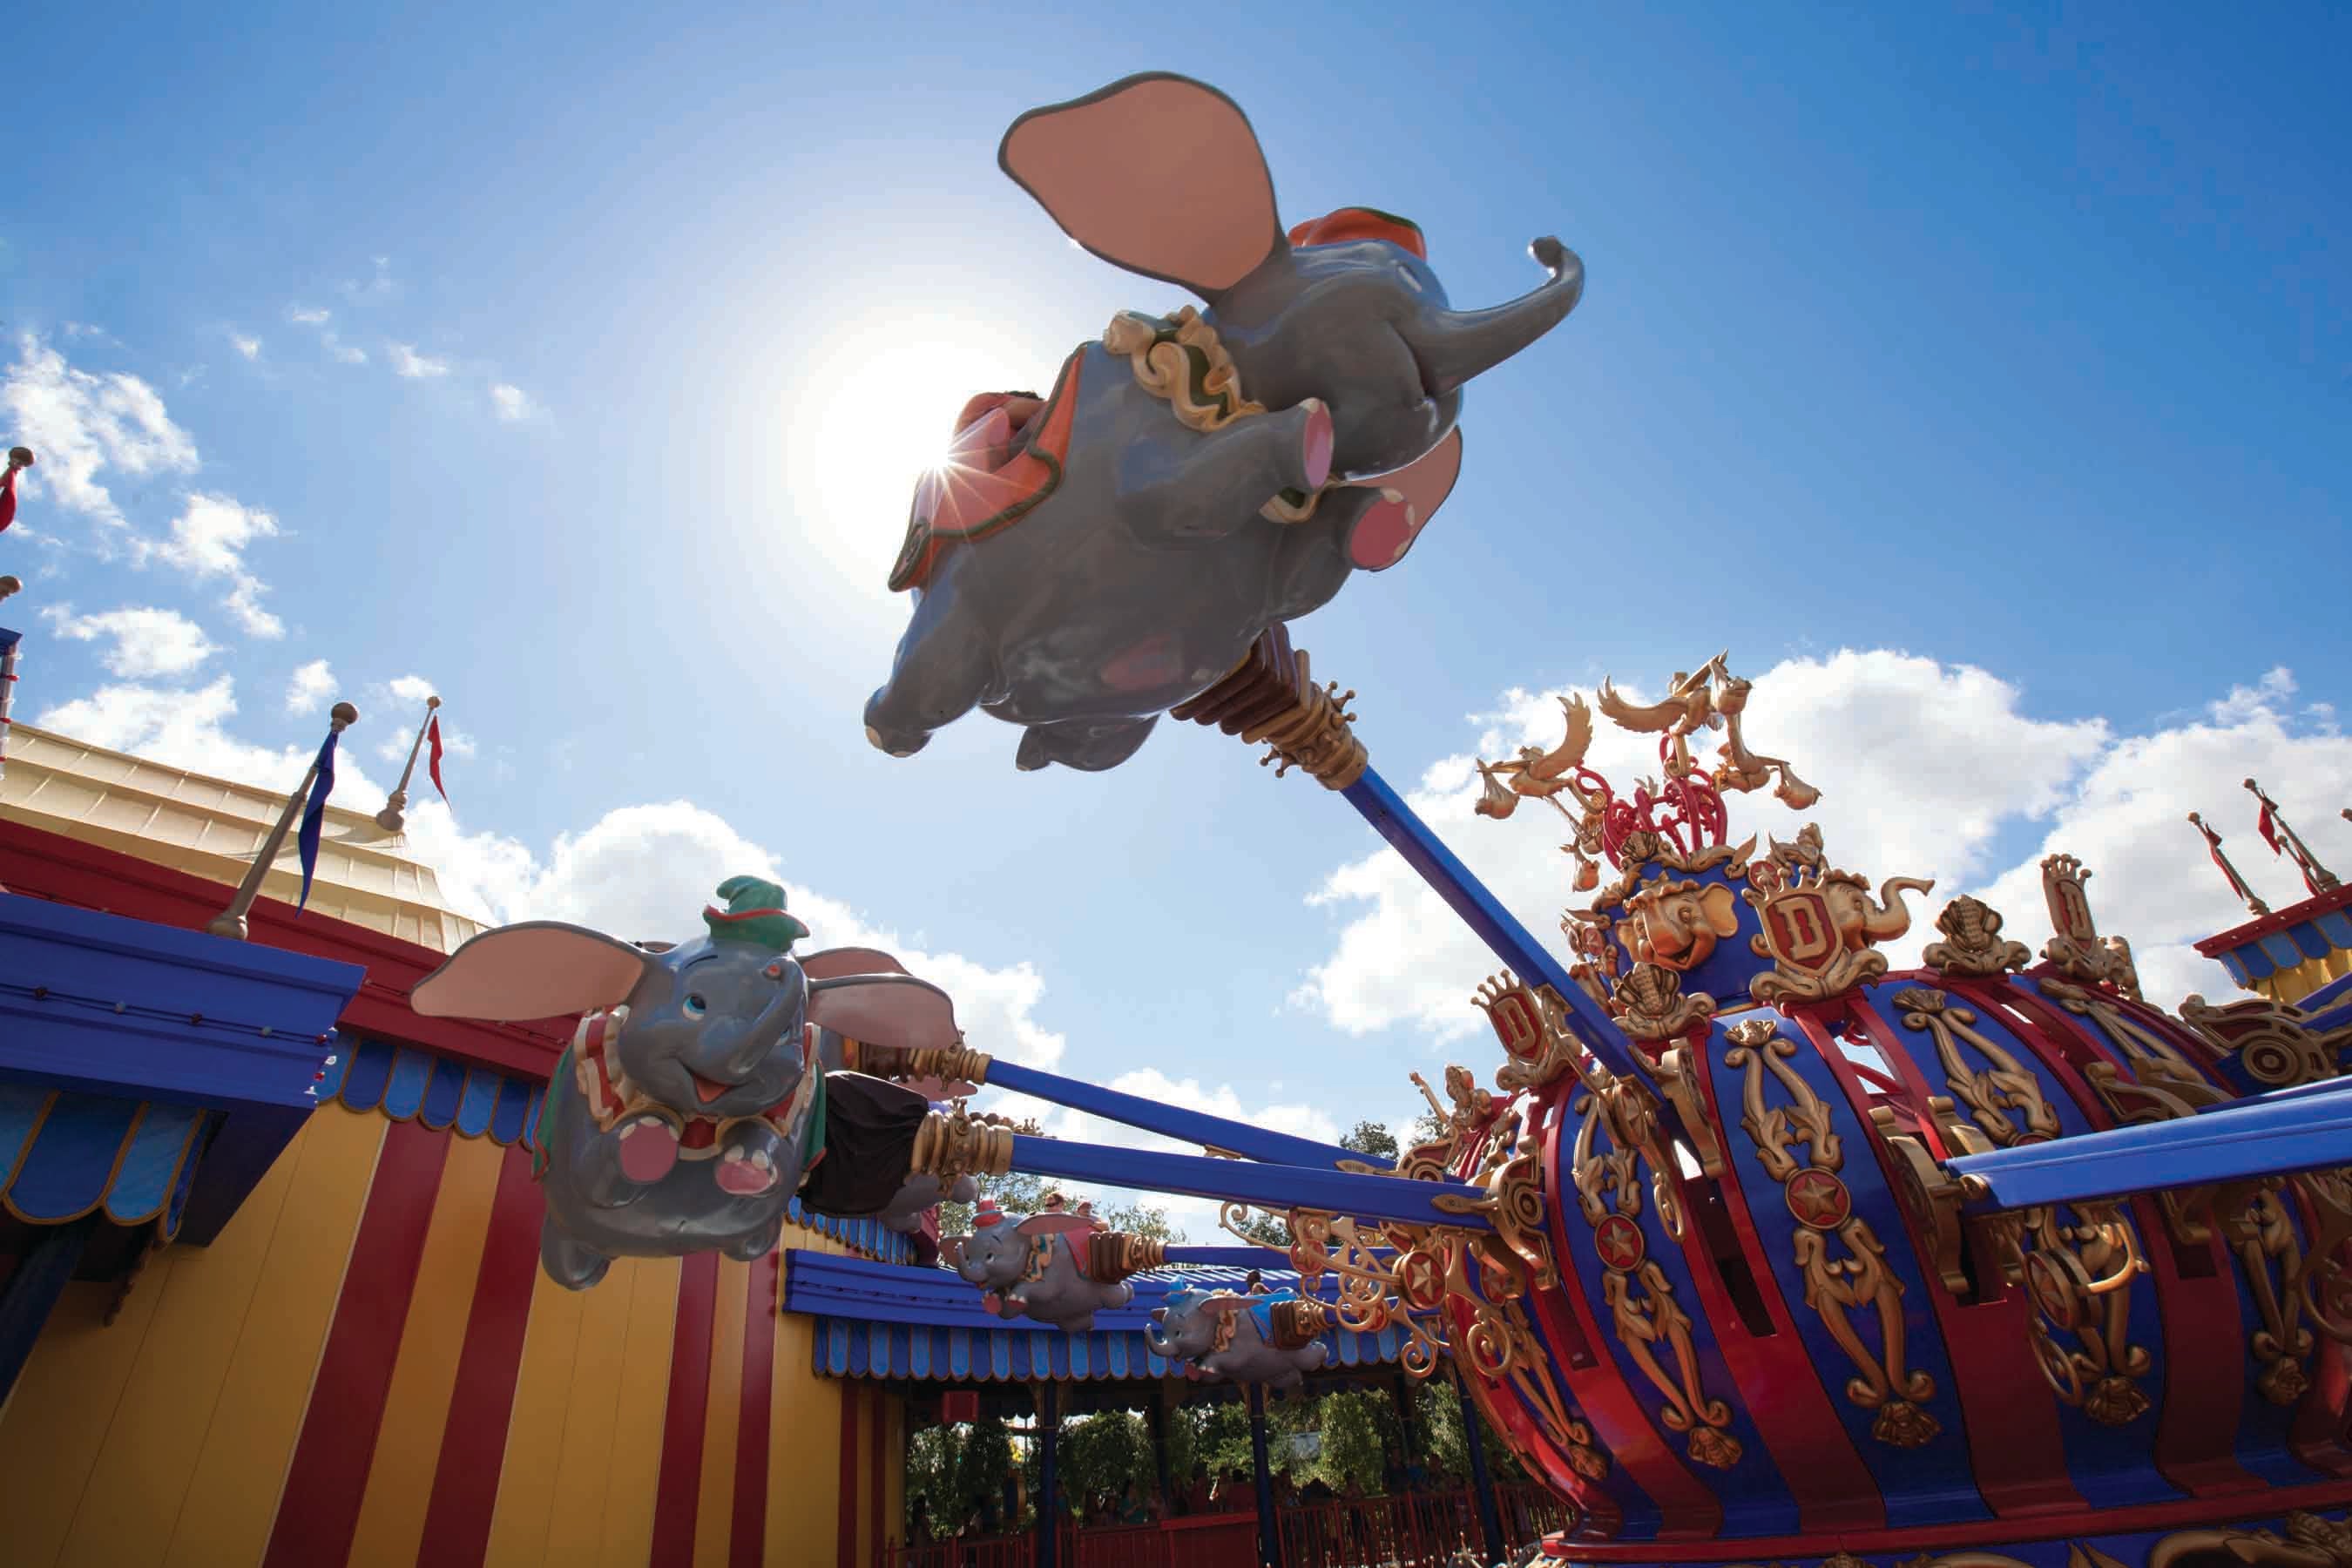 Take a spin on Dumbo the Flying Elephant at Magic Kingdom